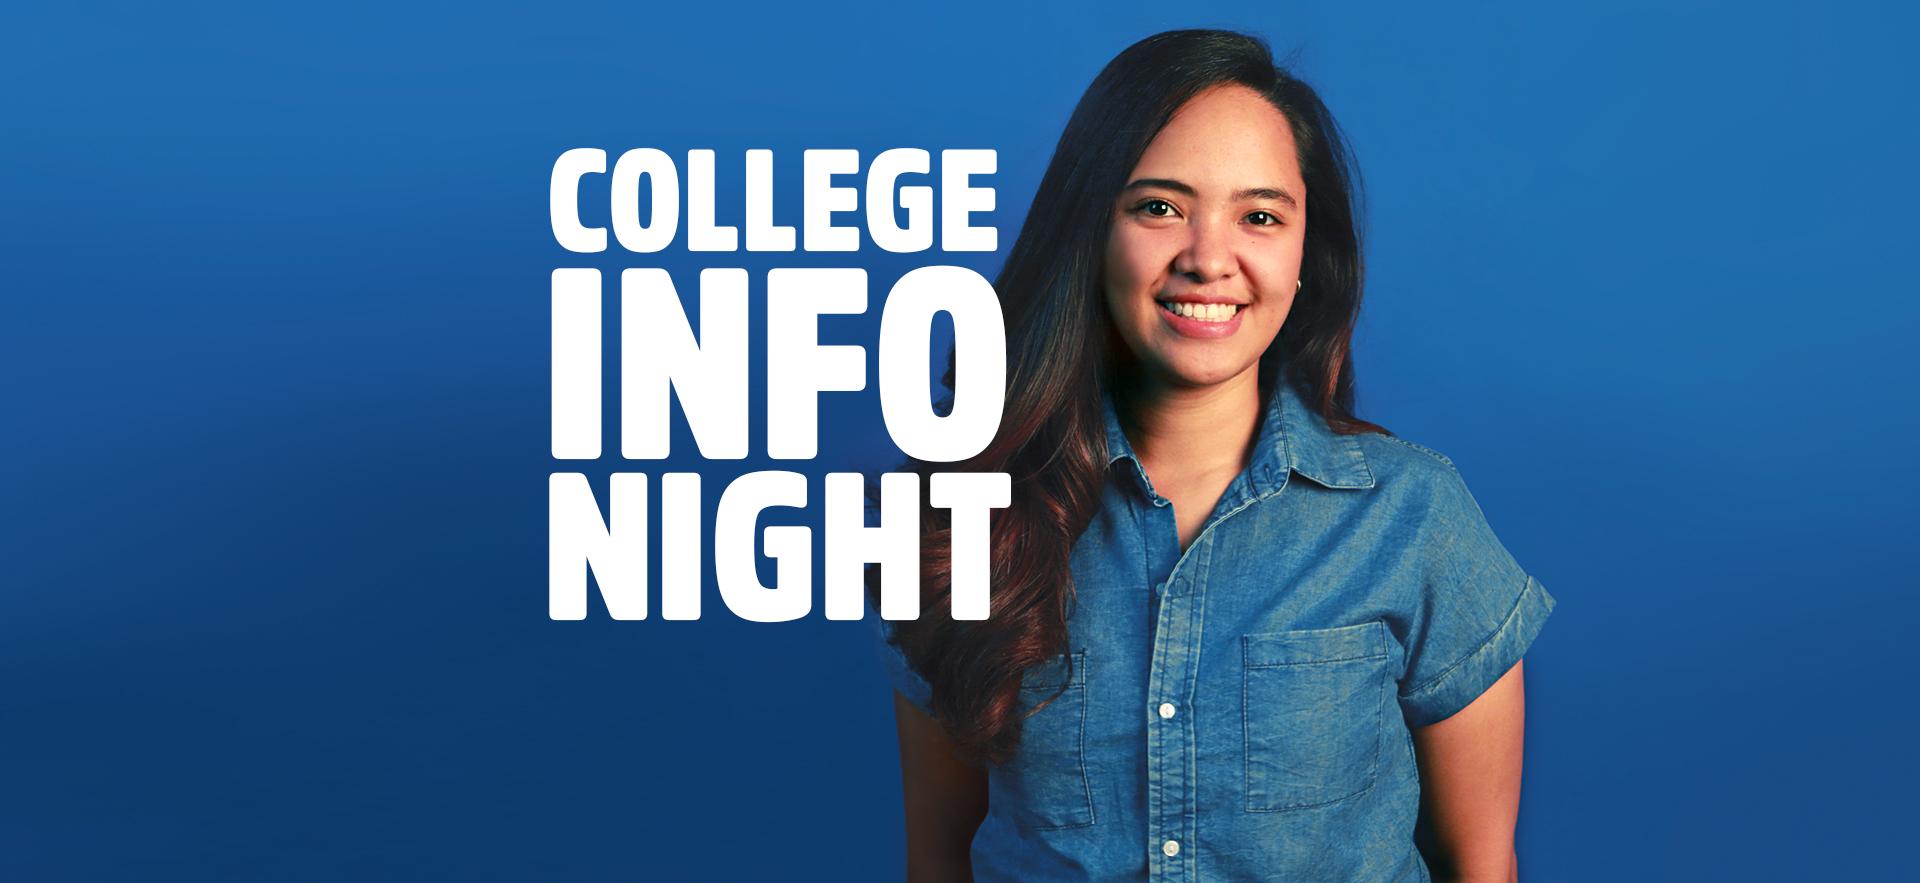 College Info Night image with student in blue with blue background